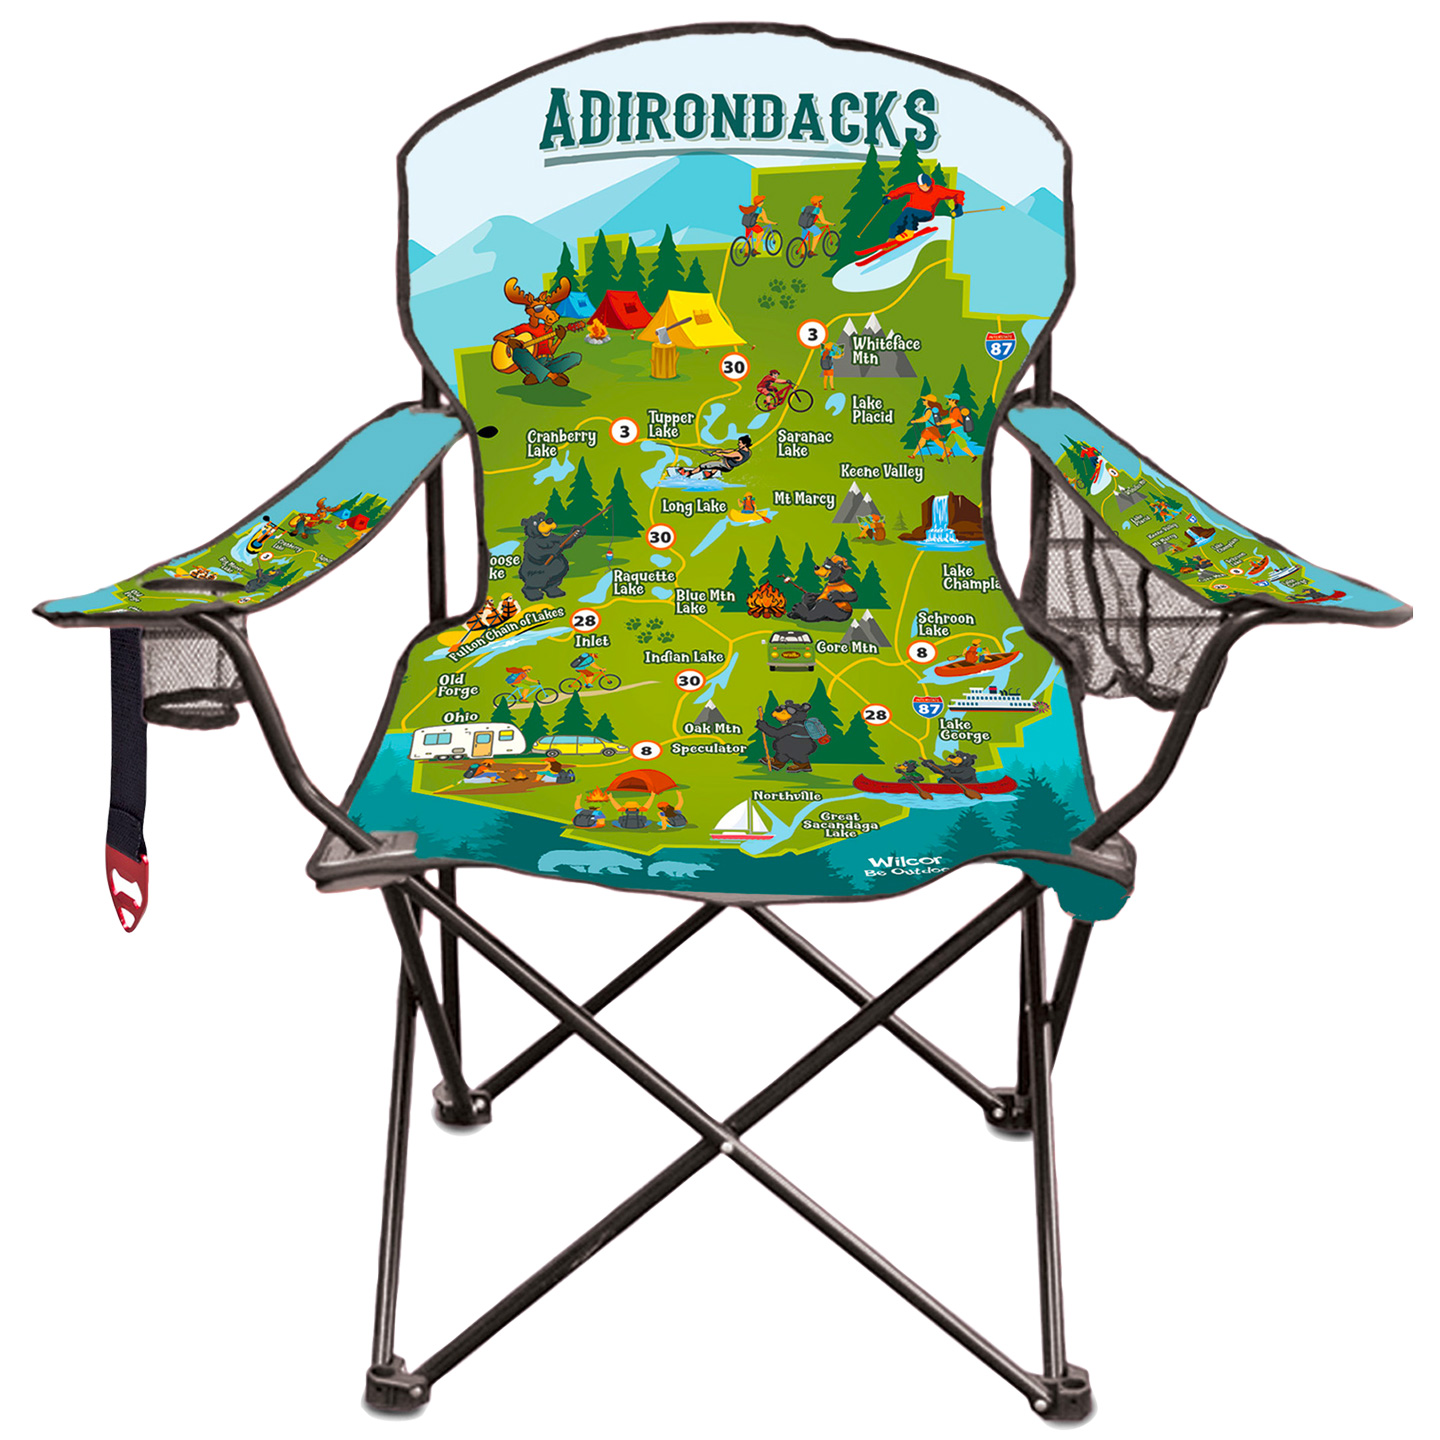 ADK MAP ADULT ARM CHAIR